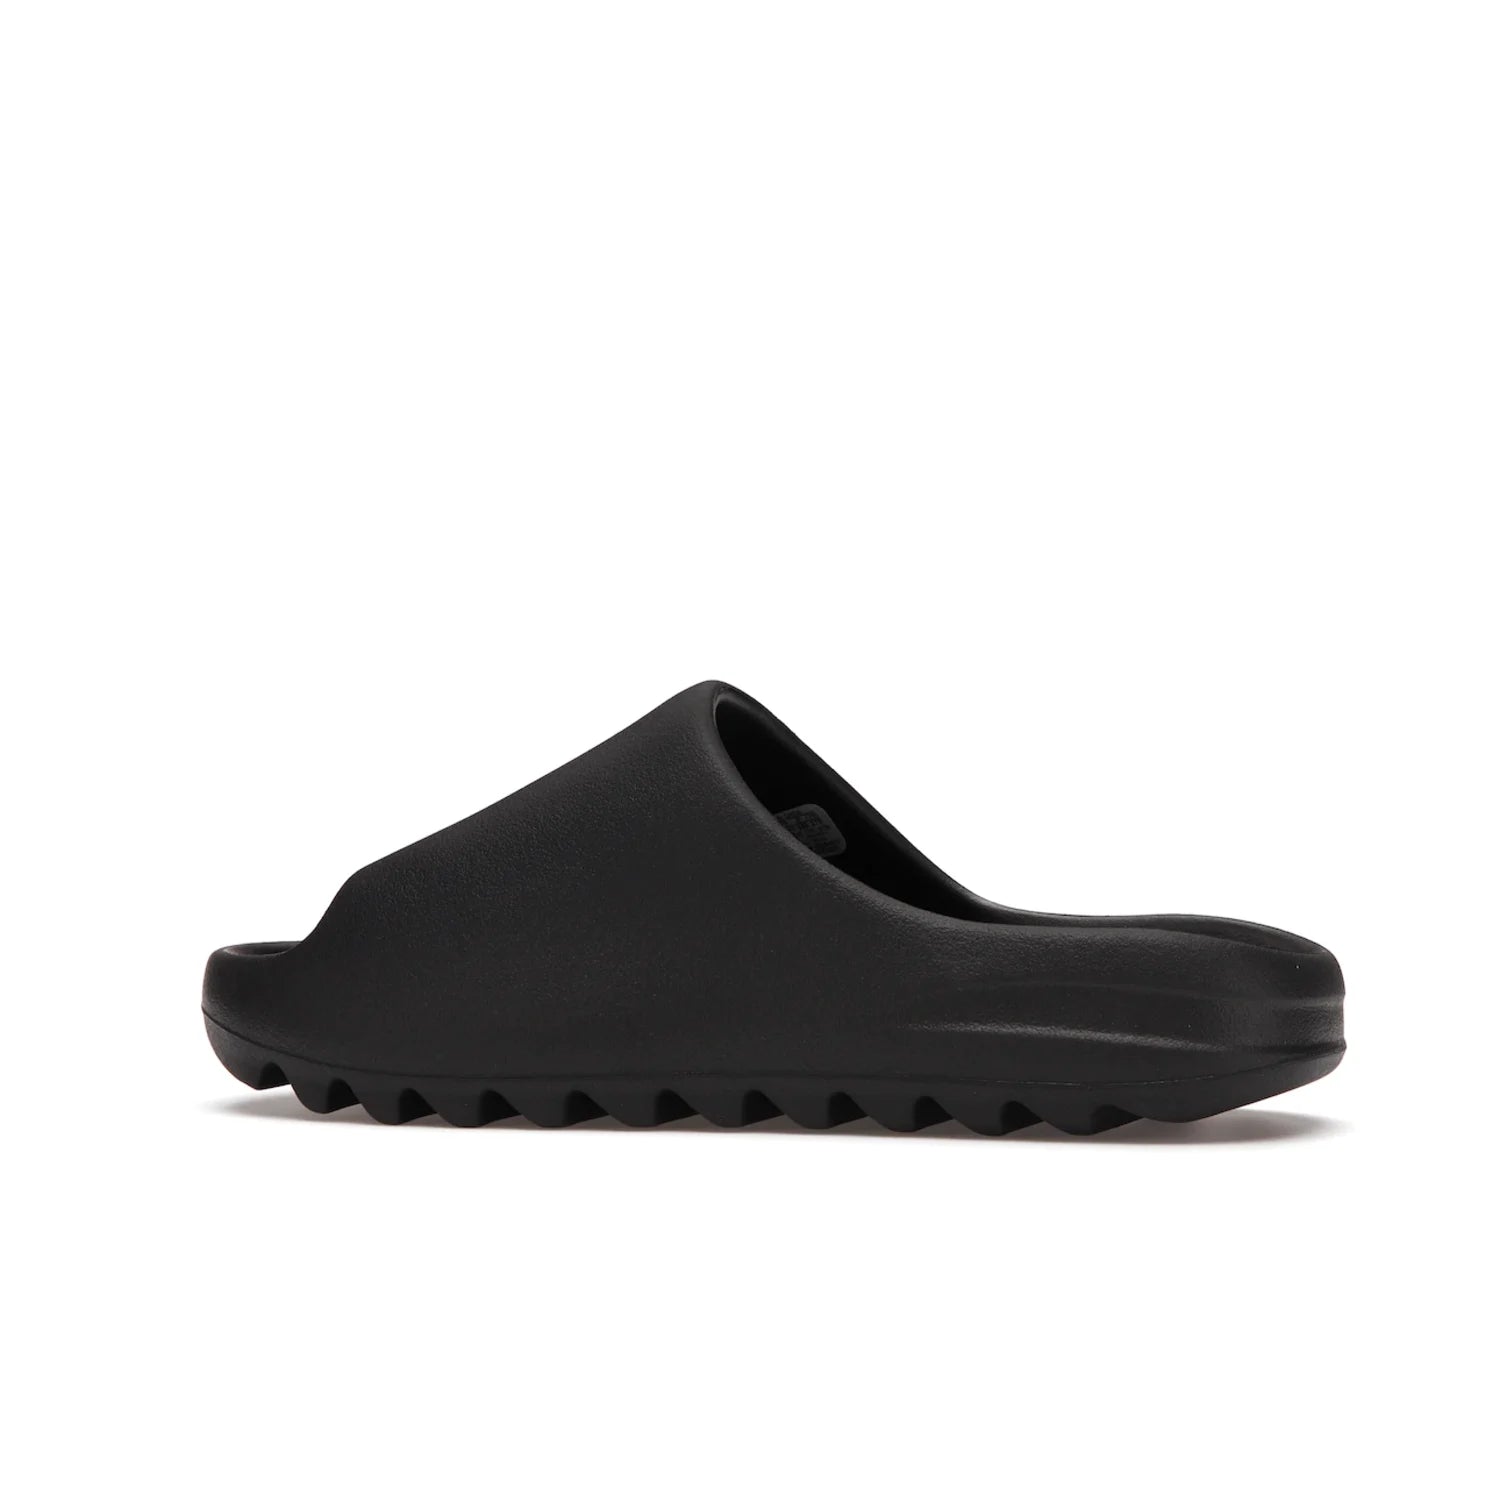 adidas Yeezy Slide Onyx - Image 21 - Only at www.BallersClubKickz.com - Step into comfort and style with the adidas Yeezy Slide Onyx. Featuring foam construction, an all-black colorway and a grooved outsole for stability and responsiveness, this versatile slide is a must-have for your collection.